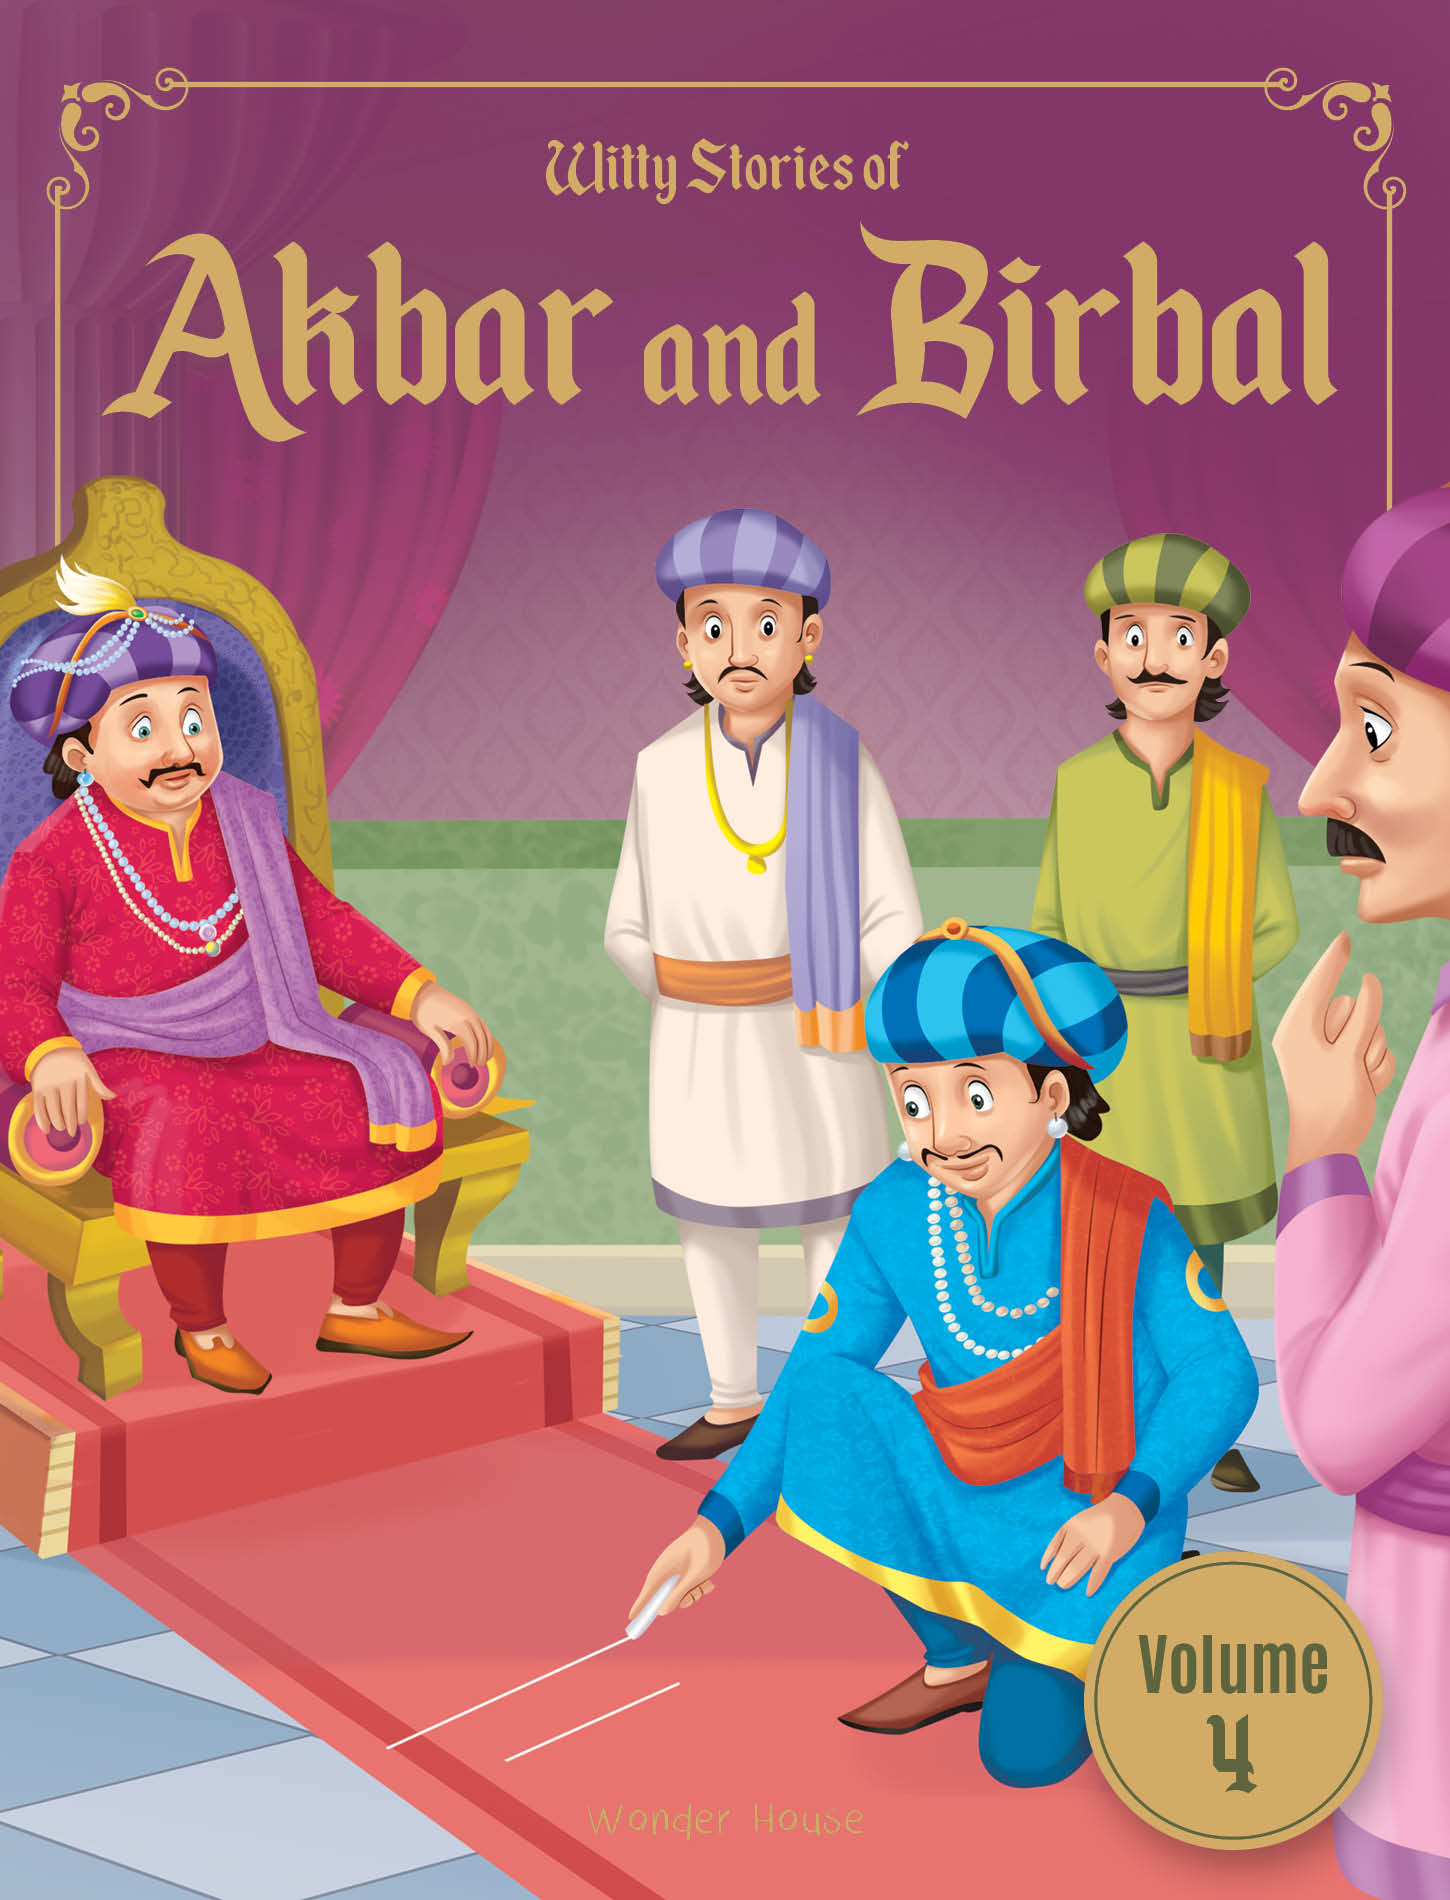 Witty Stories of Akbar and Birbal - Volume 4: Illustrated Humorous Stories For Kids